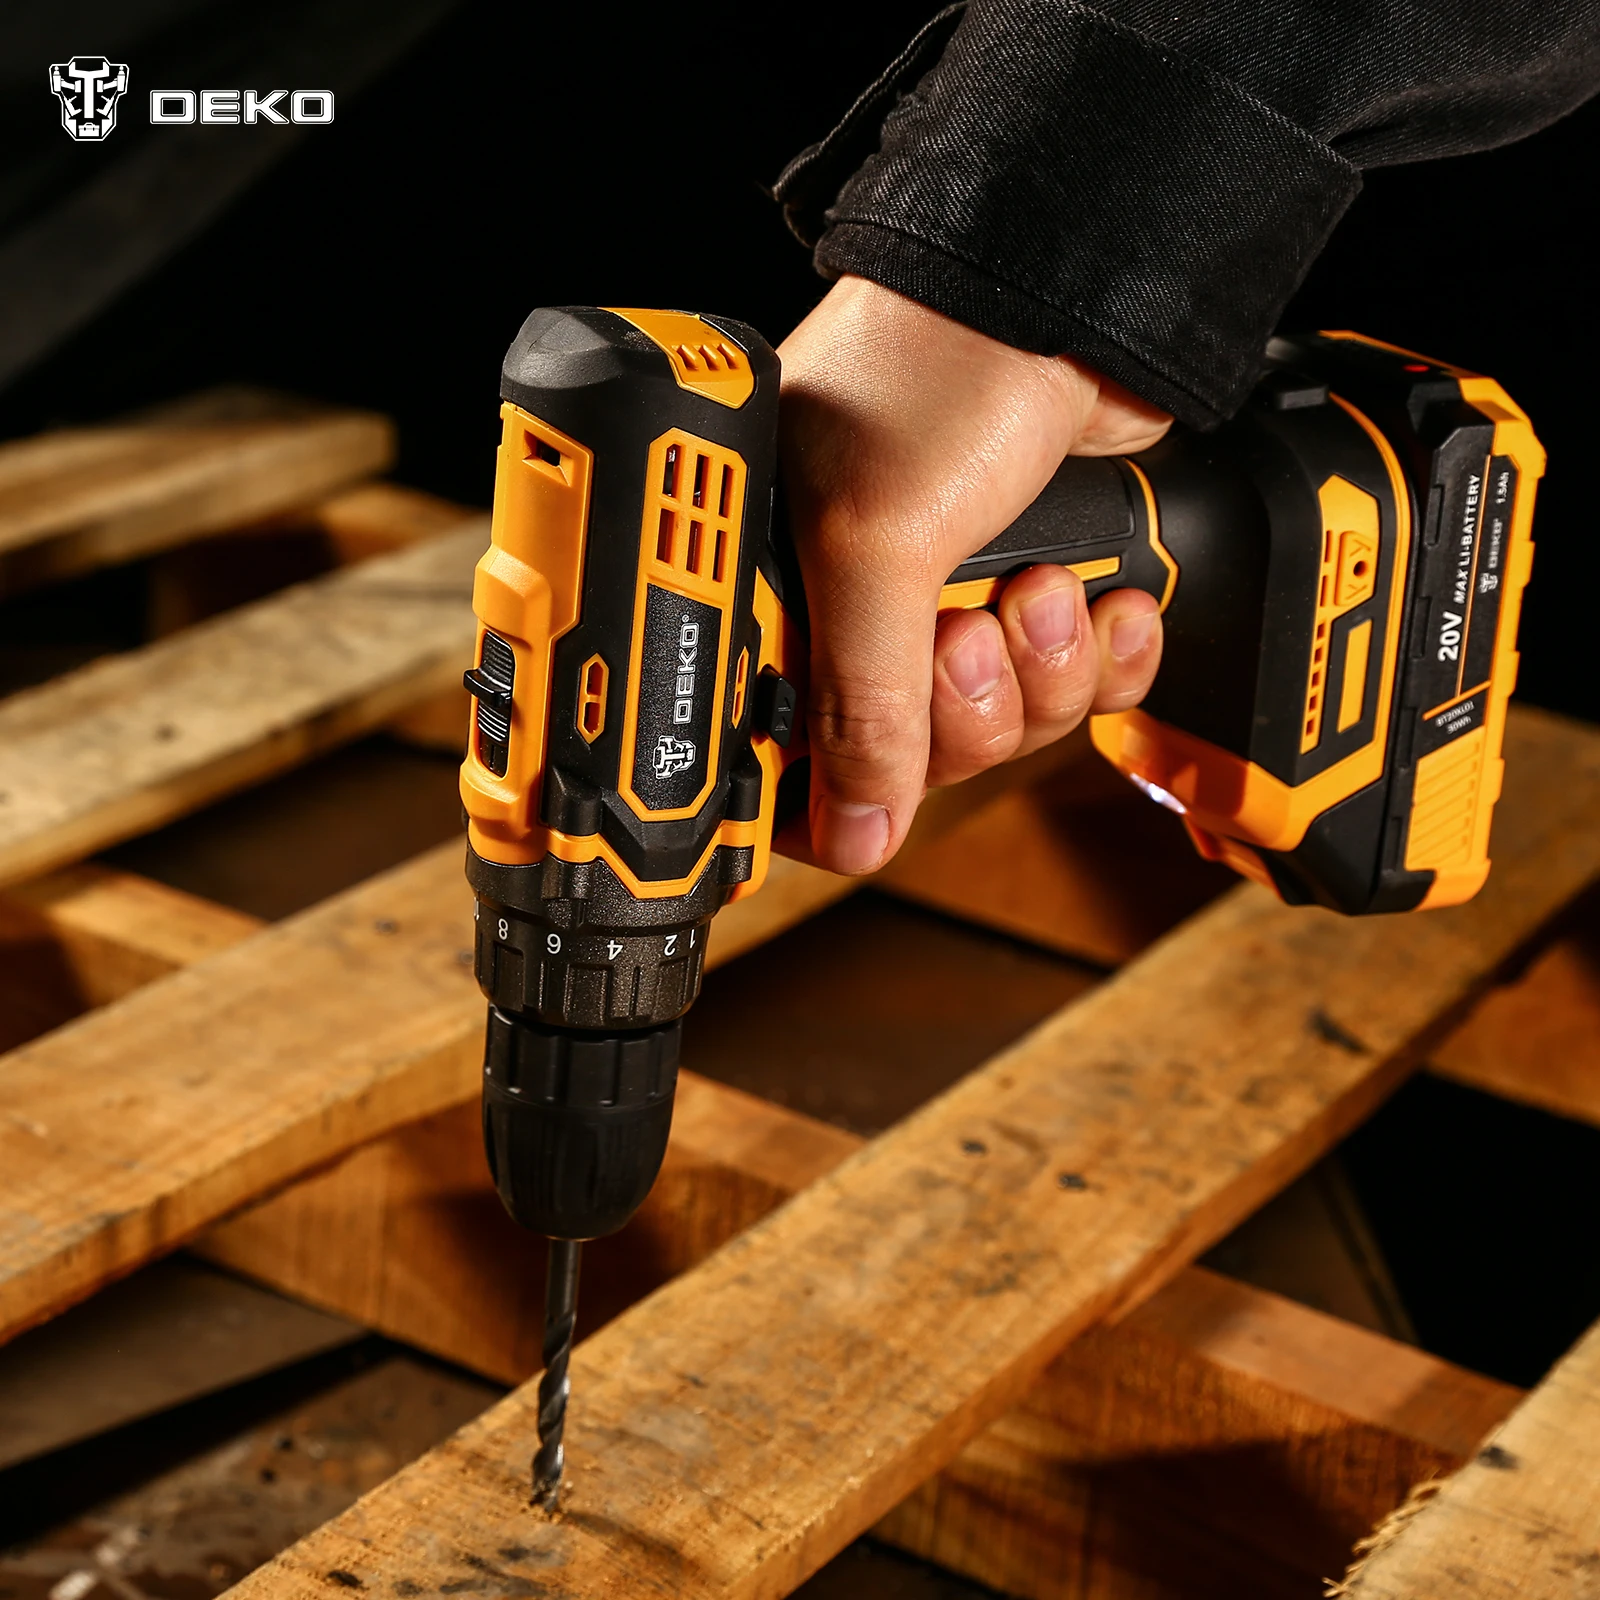 https://ae01.alicdn.com/kf/H5e08f3828e624f5ca7c15a233a58c257V/DEKO-New-20V-Cordless-Drill-Driver-40N-m-Electric-Screwdriver-1500mAh-Lithium-ion-Battery-Fast-Charger.jpg